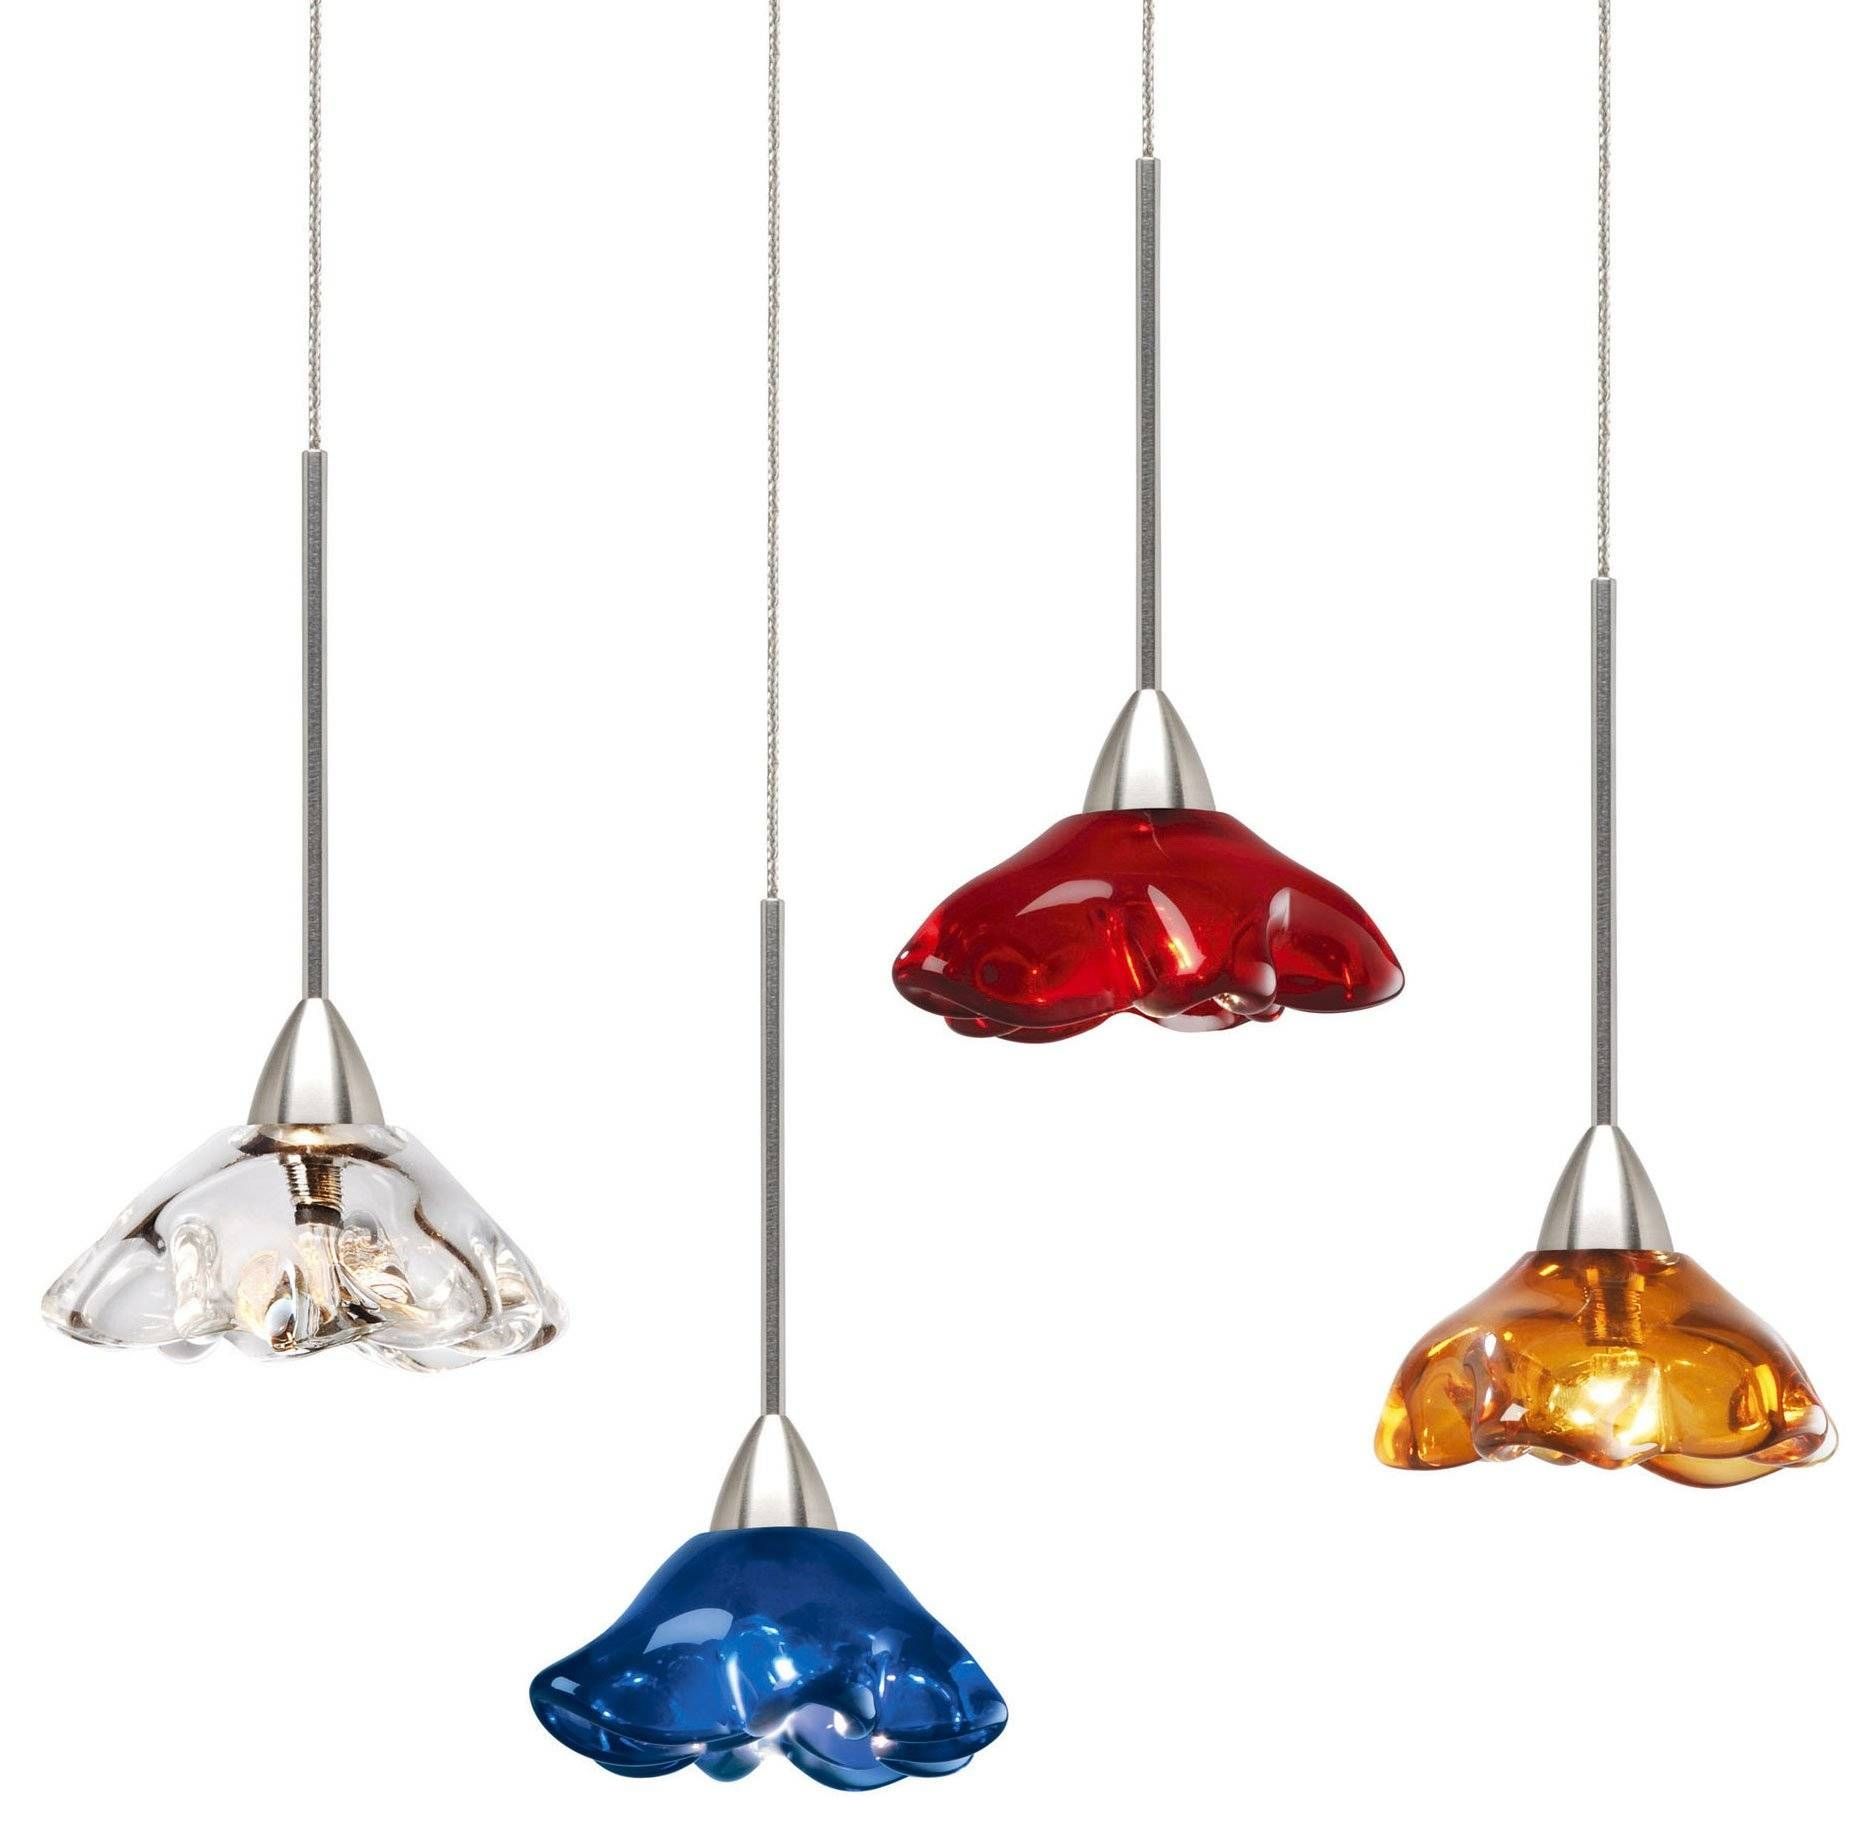 Luxury Mini Pendant Light Fixtures 73 About Remodel Red Pendant Inside Modern Red Pendant Lighting (View 9 of 15)